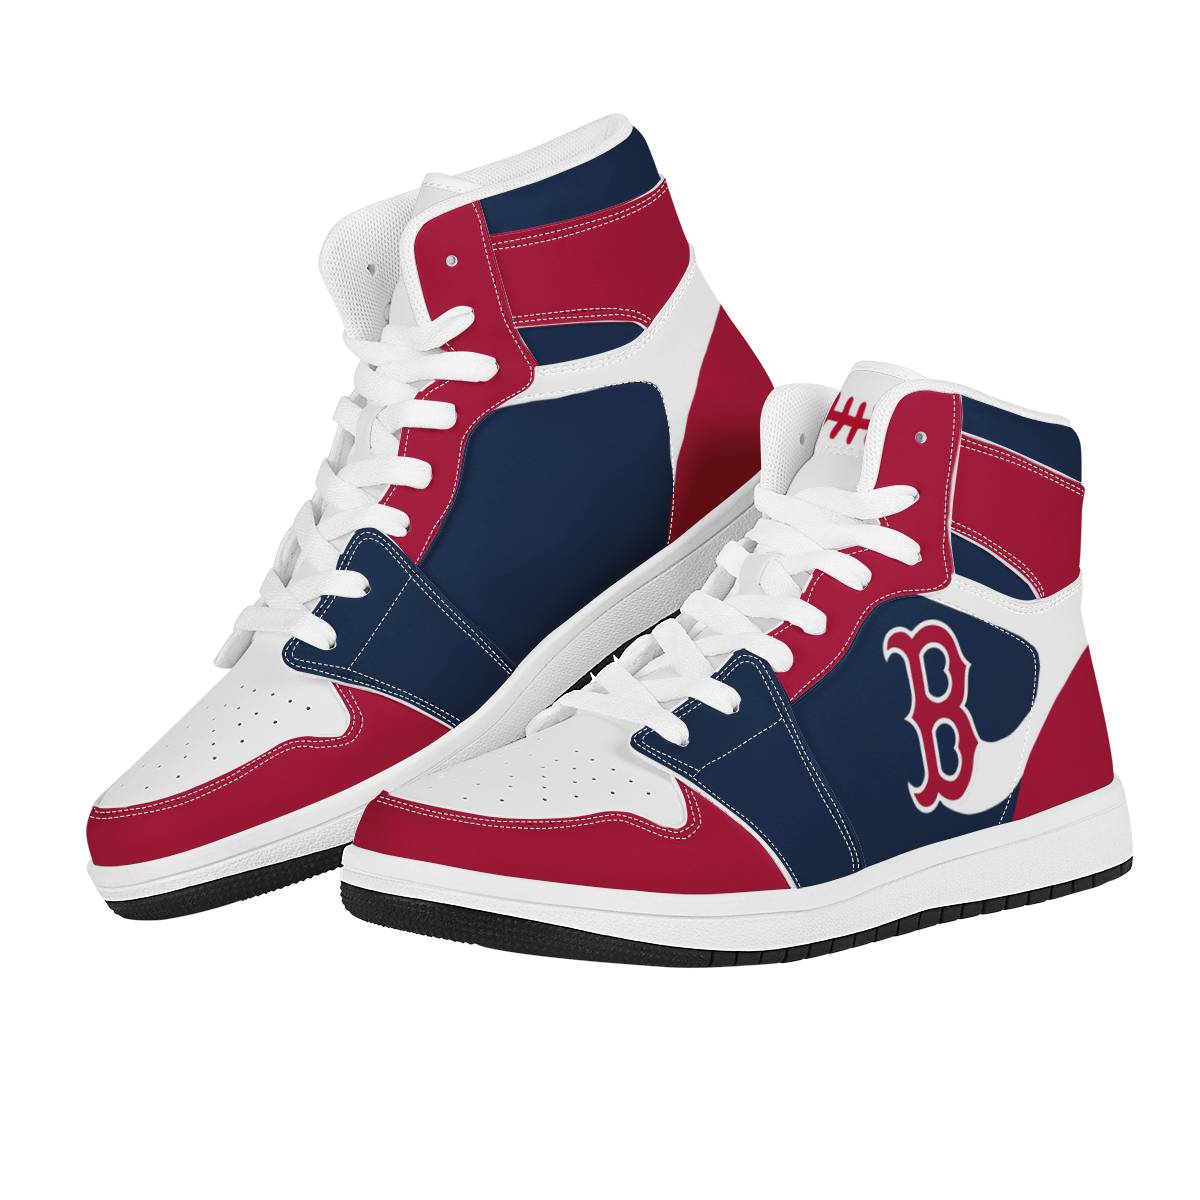 Men's Boston Red Sox High Top Leather AJ1 Sneakers 001